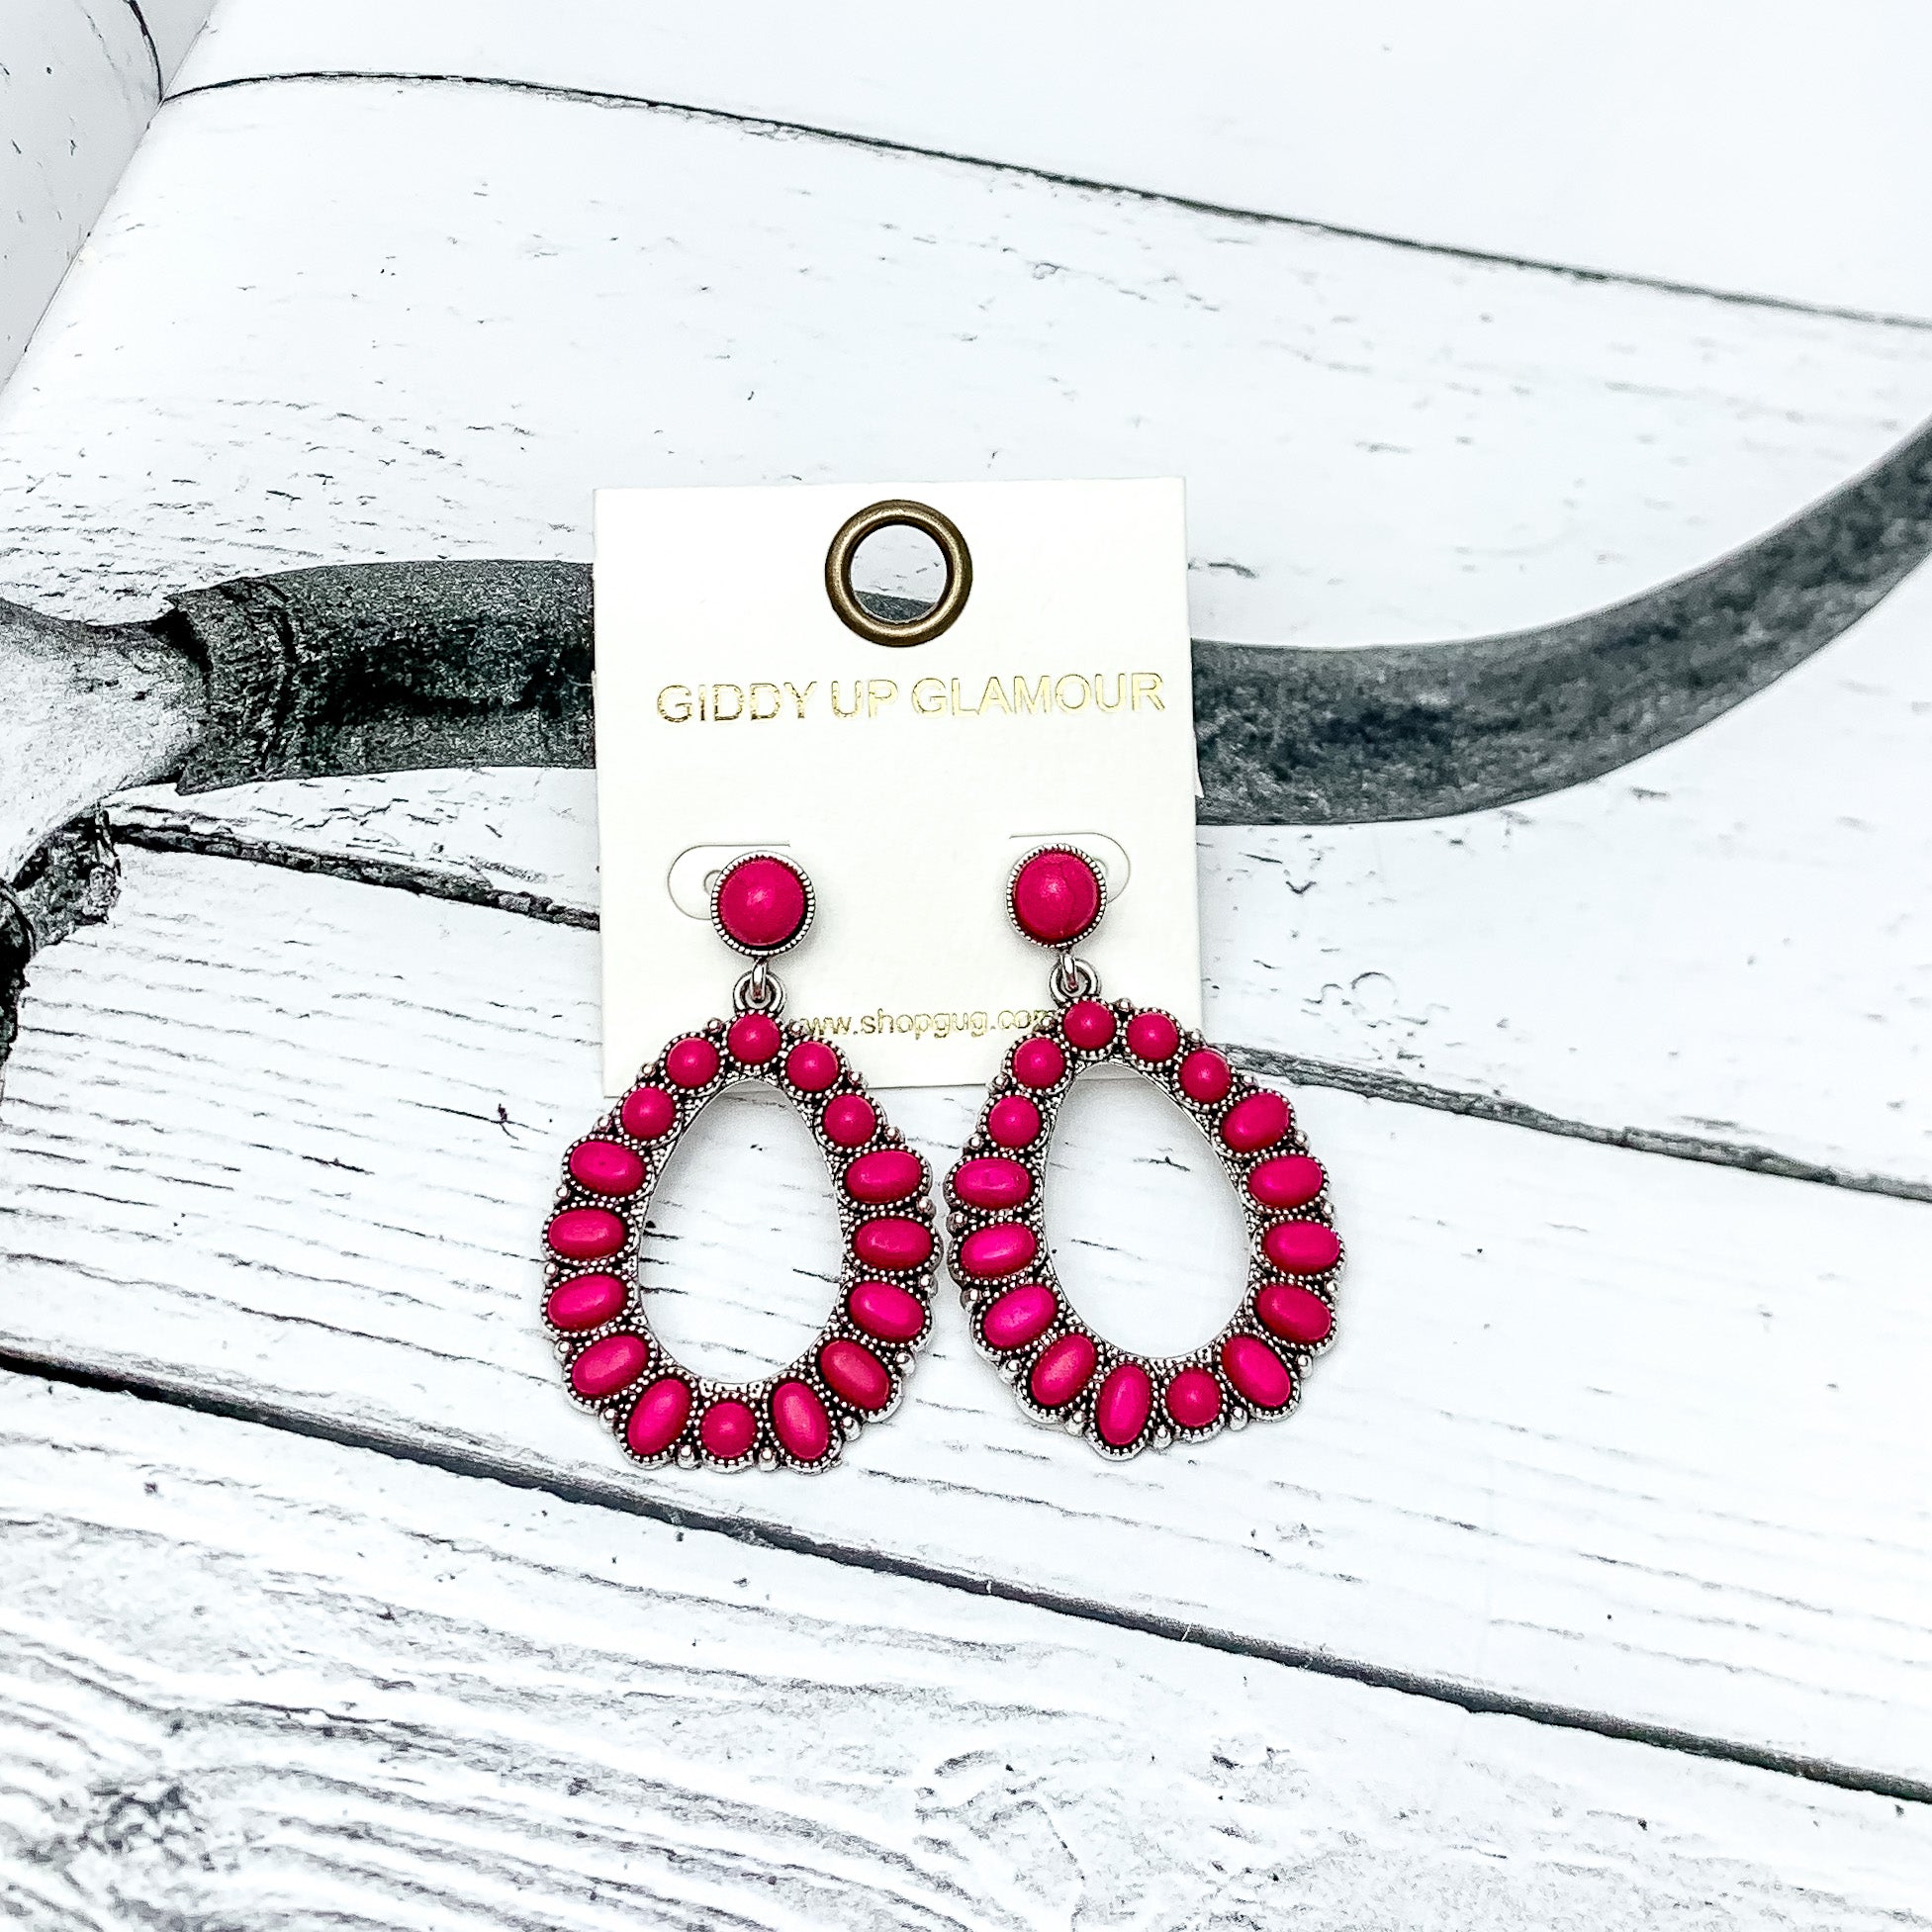 Small Circle Post Open Teardrop Earrings with Stones in Hot pink. These earrings are pictured on a western background.